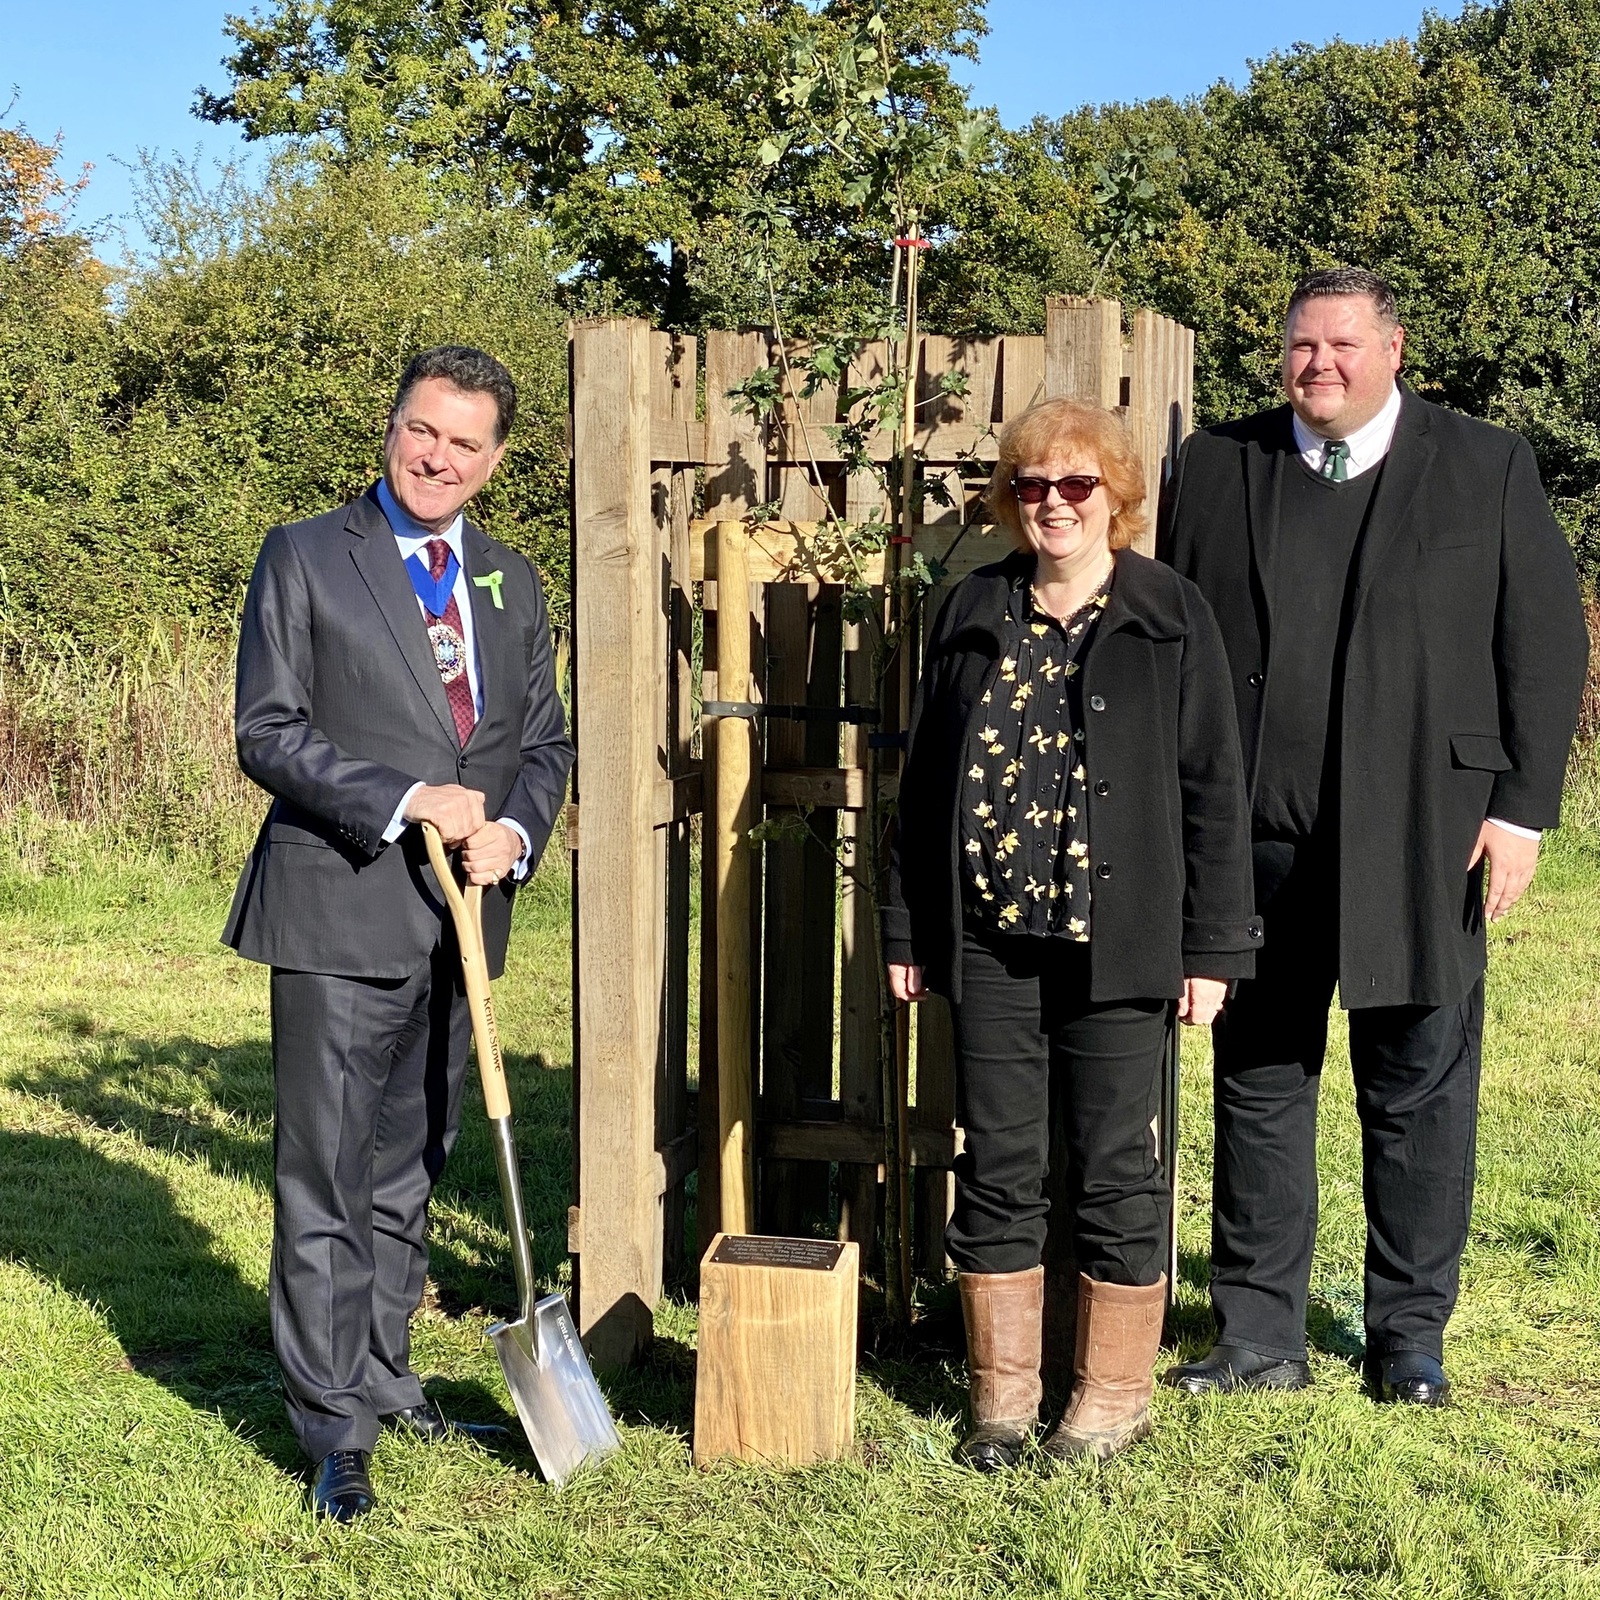 10 Oct 22 - A tree is planted in memory of Past Lord Mayor, Sir Roger Gifford in Epping Forest